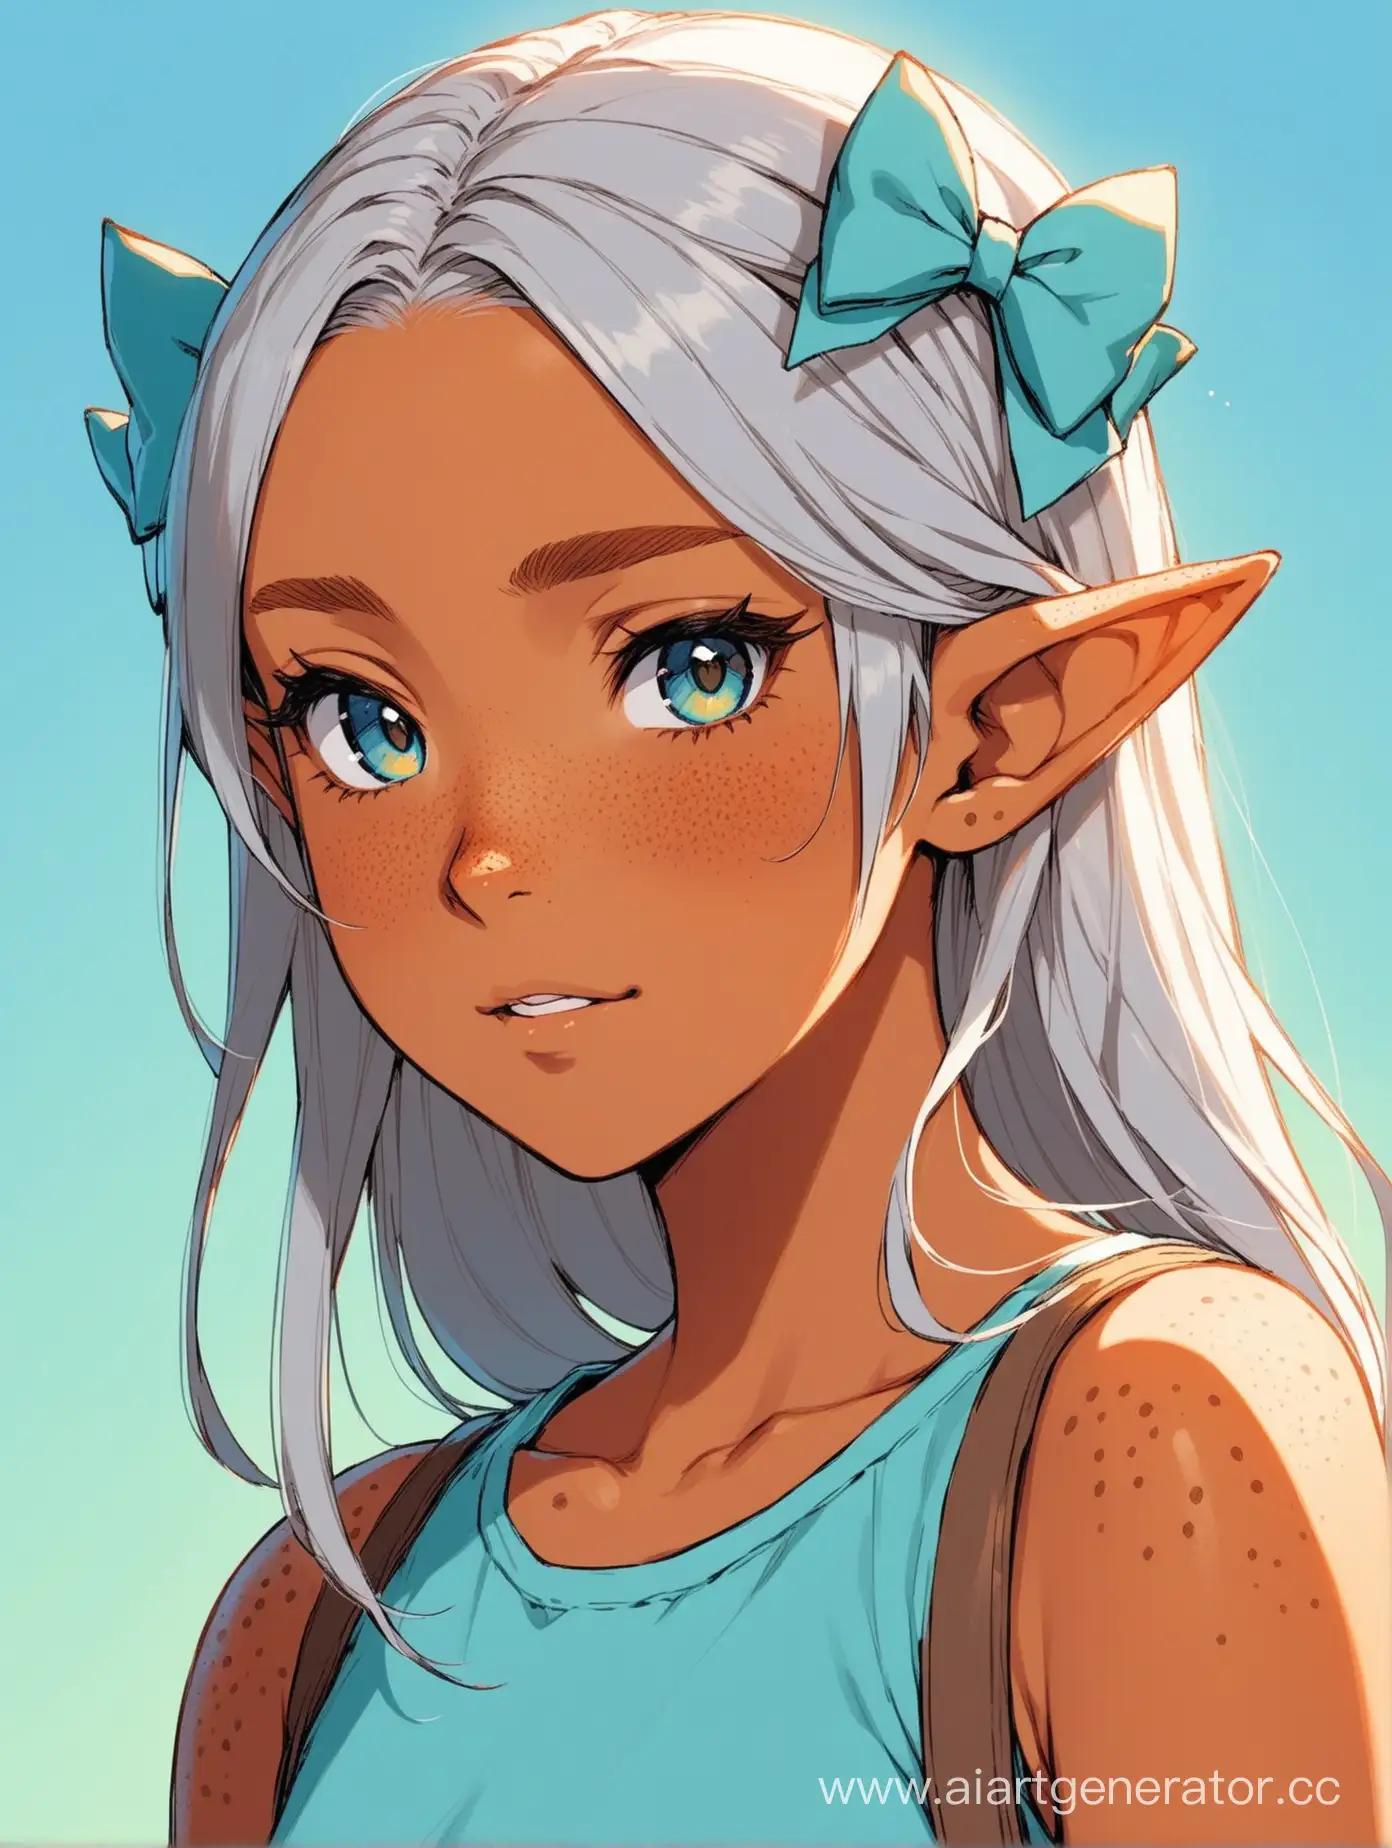 She has a blue bow on her head. An elf girl. She has ash hair and light blue clothes. Her skin is slightly tanned and has freckles. She is tomboy. She has scars on her face 